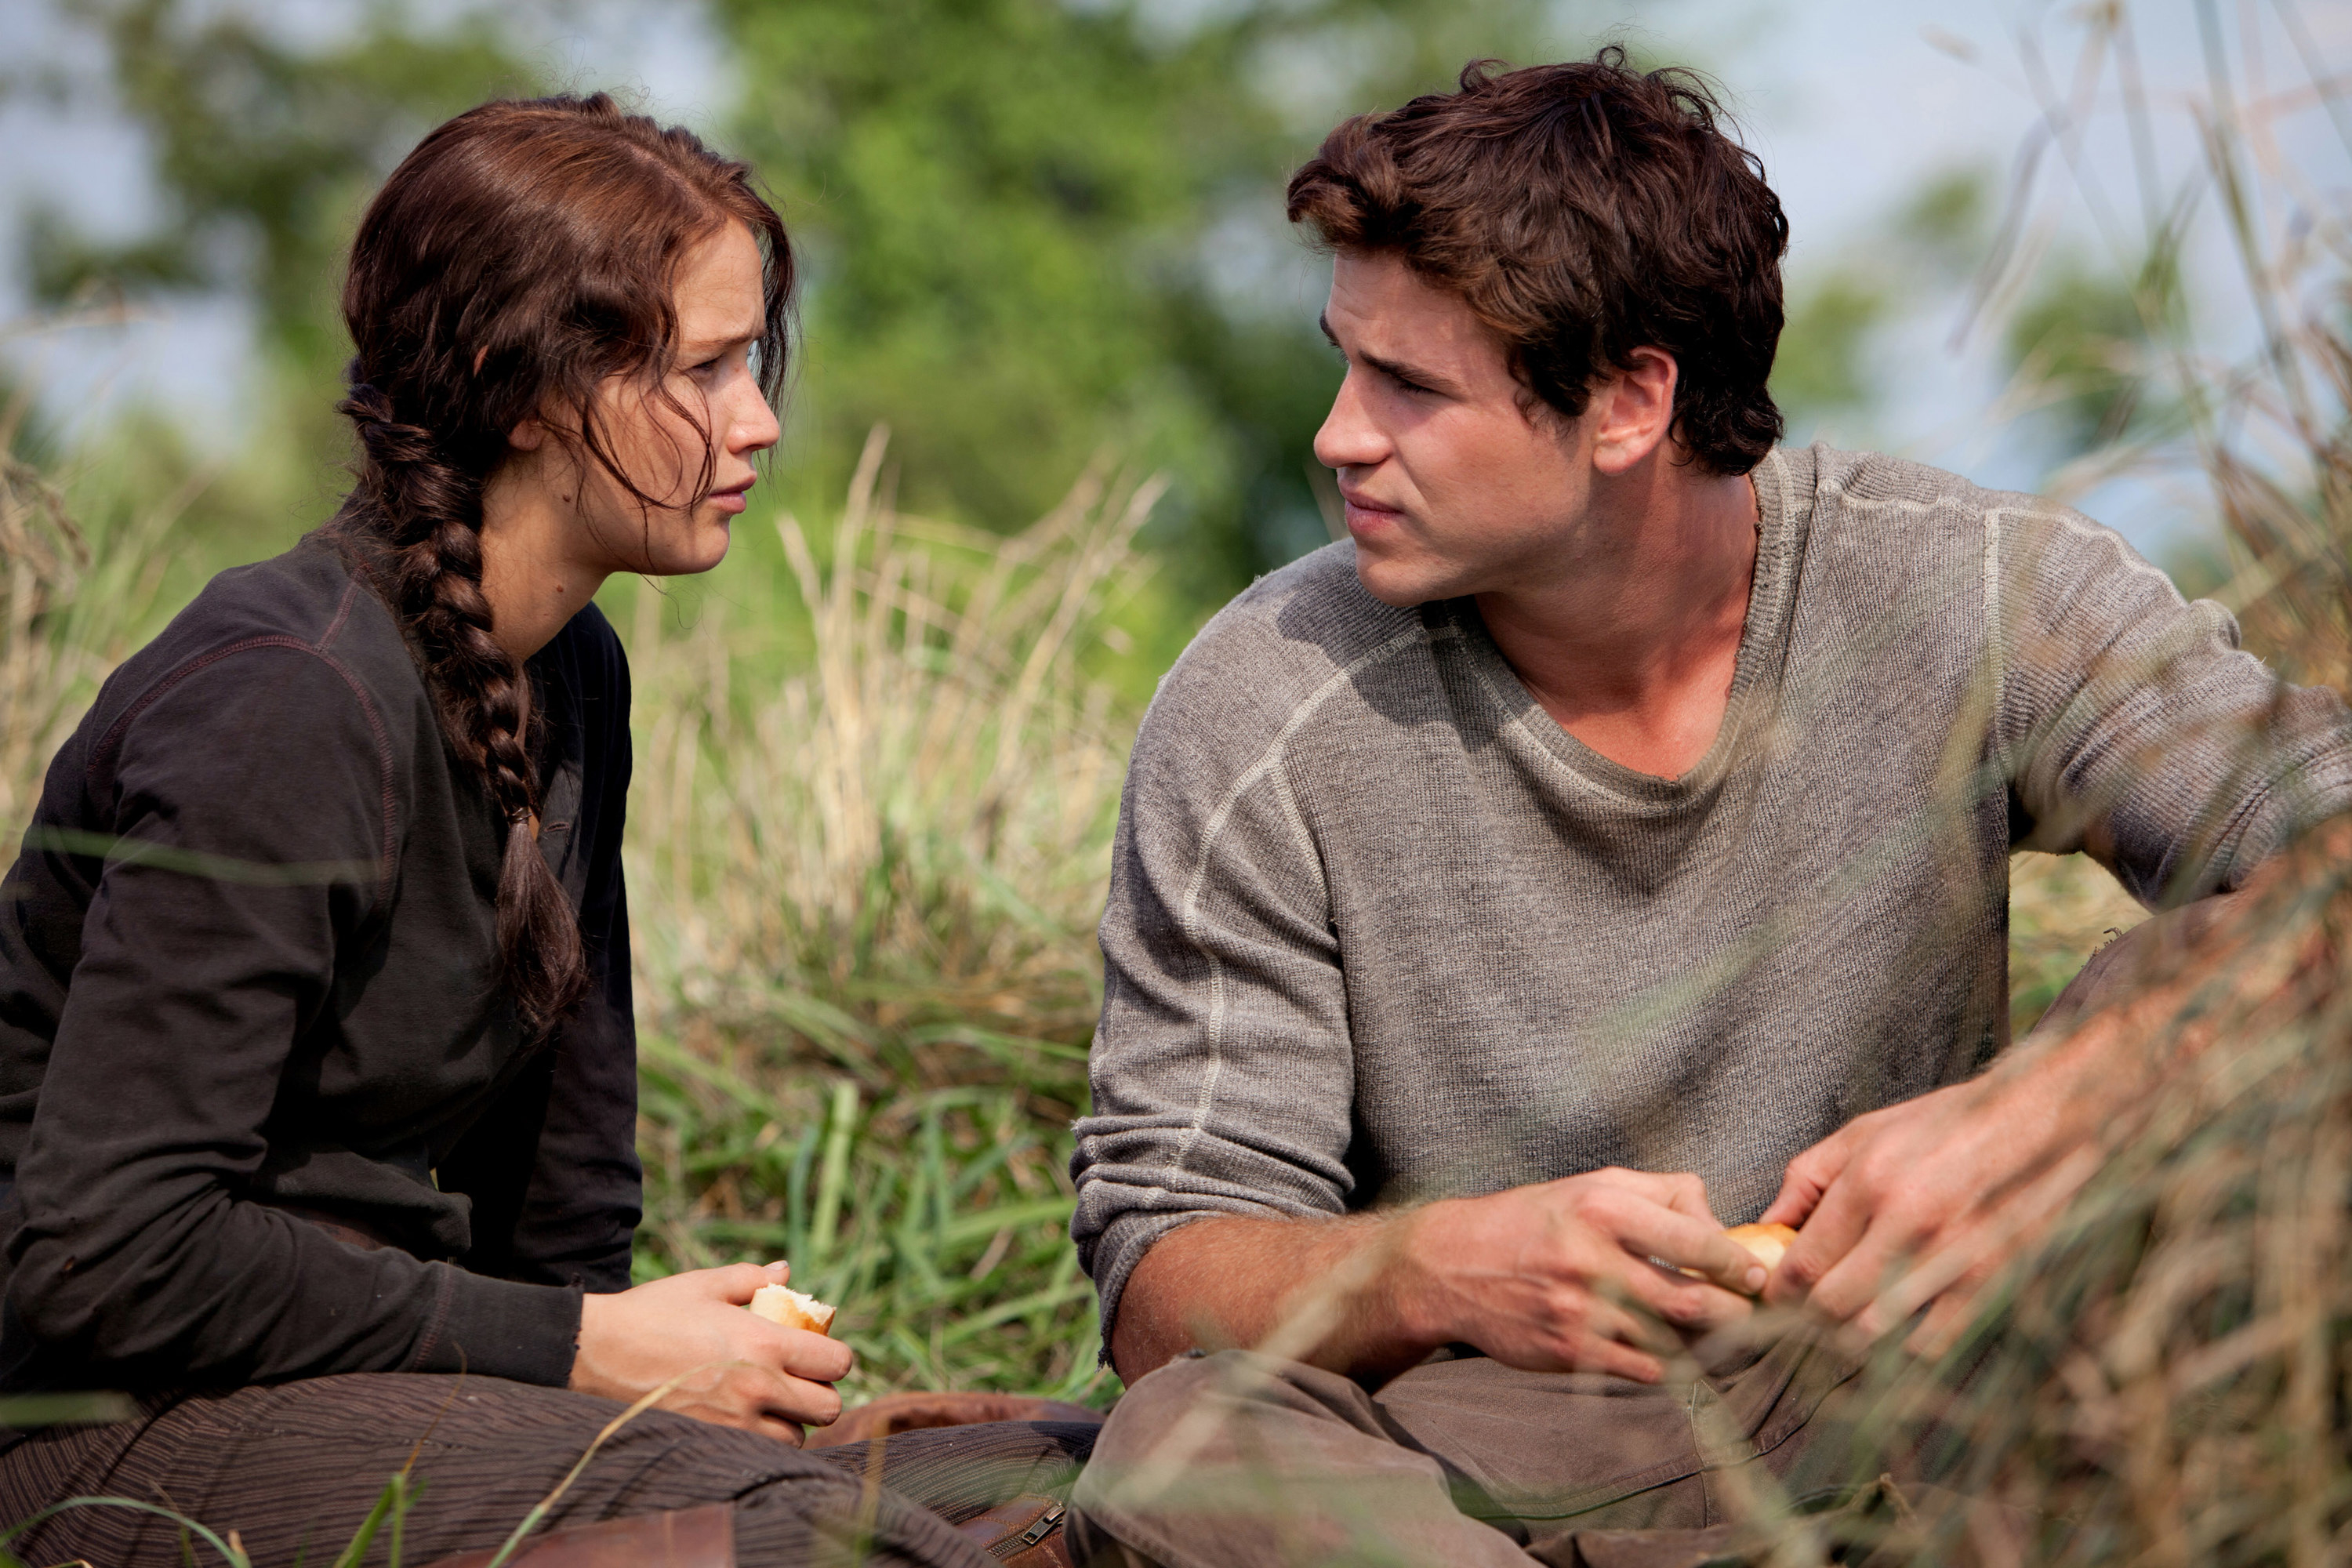 Katniss and Gale looking at each other in the grass